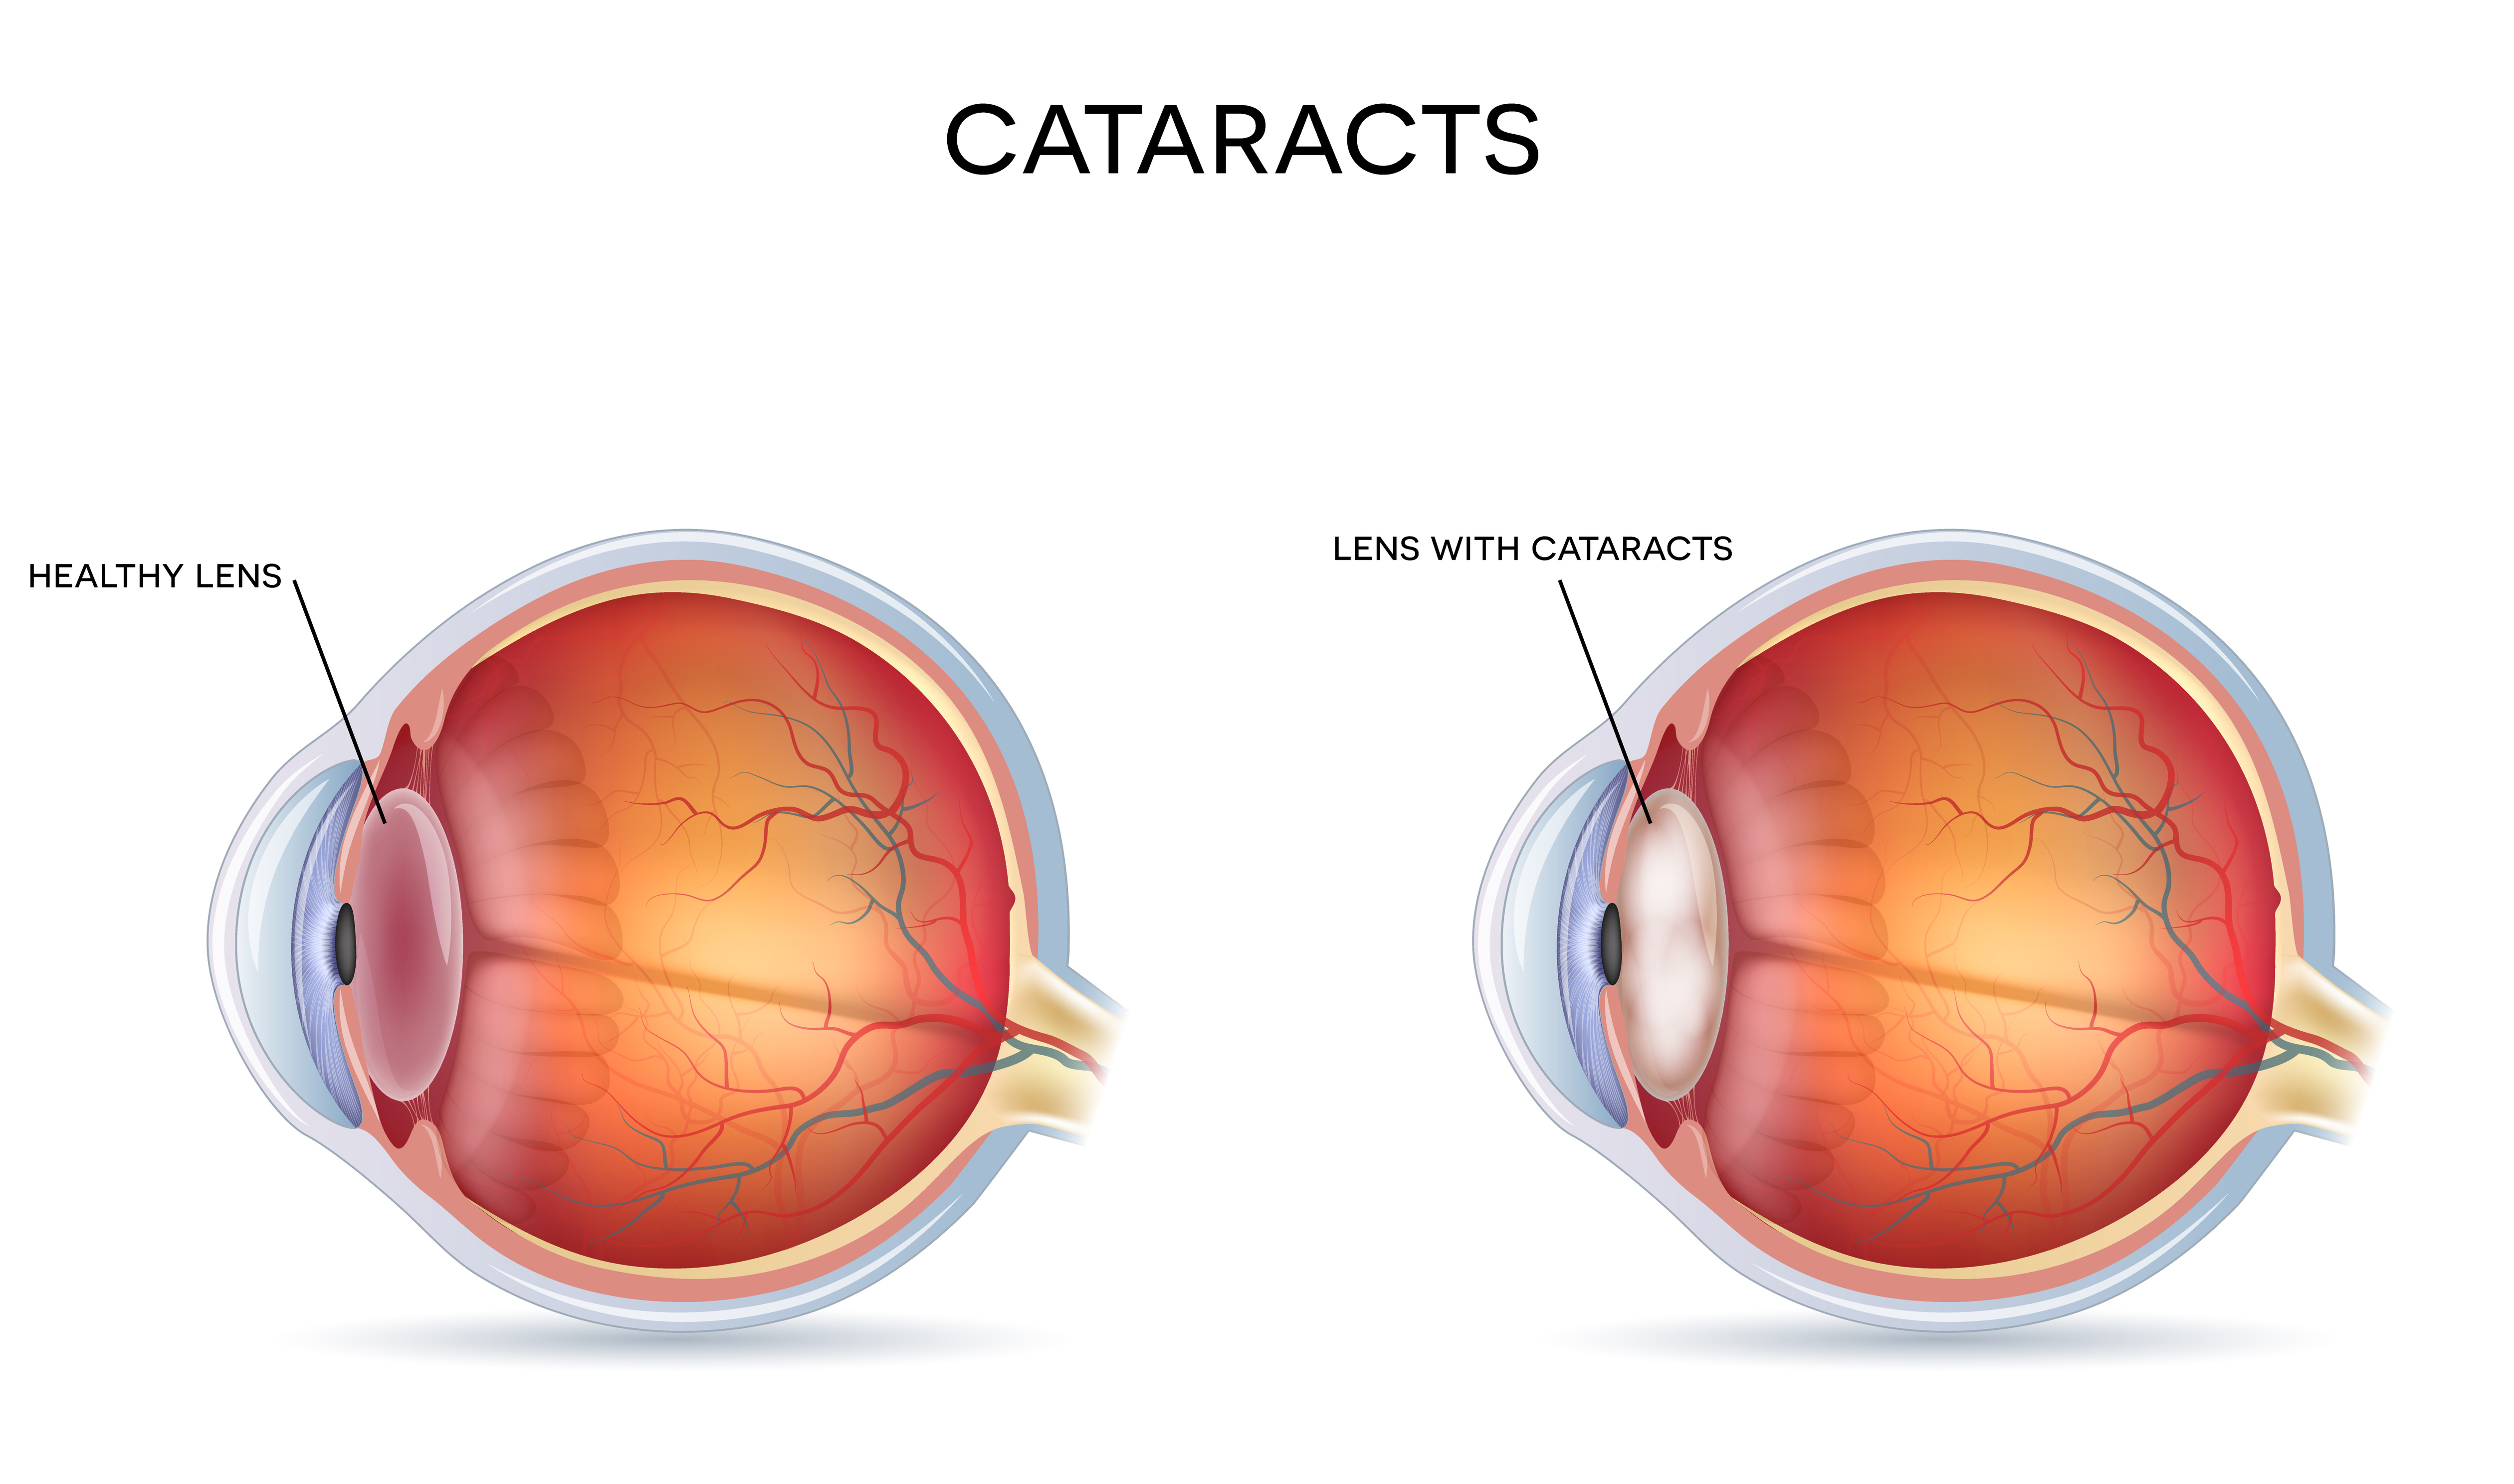 Cataract Surgery - Risks, Treatment and Recovery